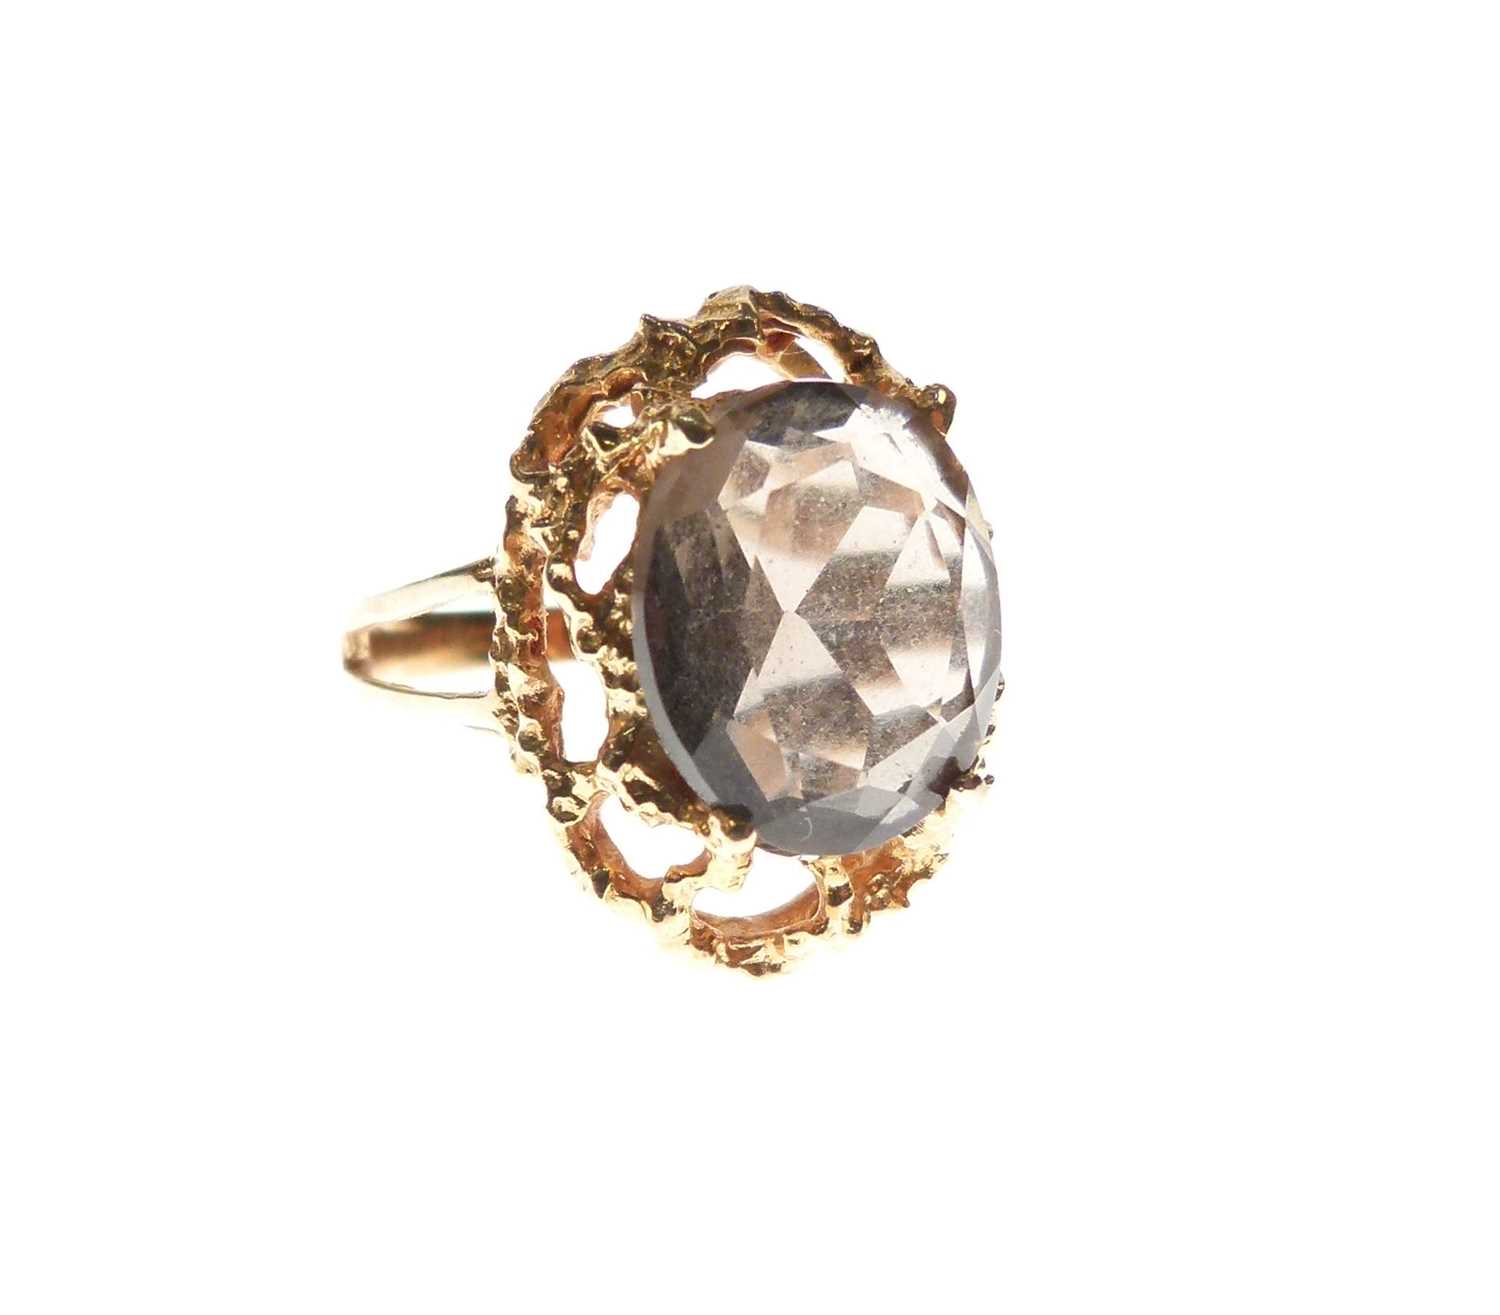 Lot 21 - '18K' yellow metal and brown topaz ring